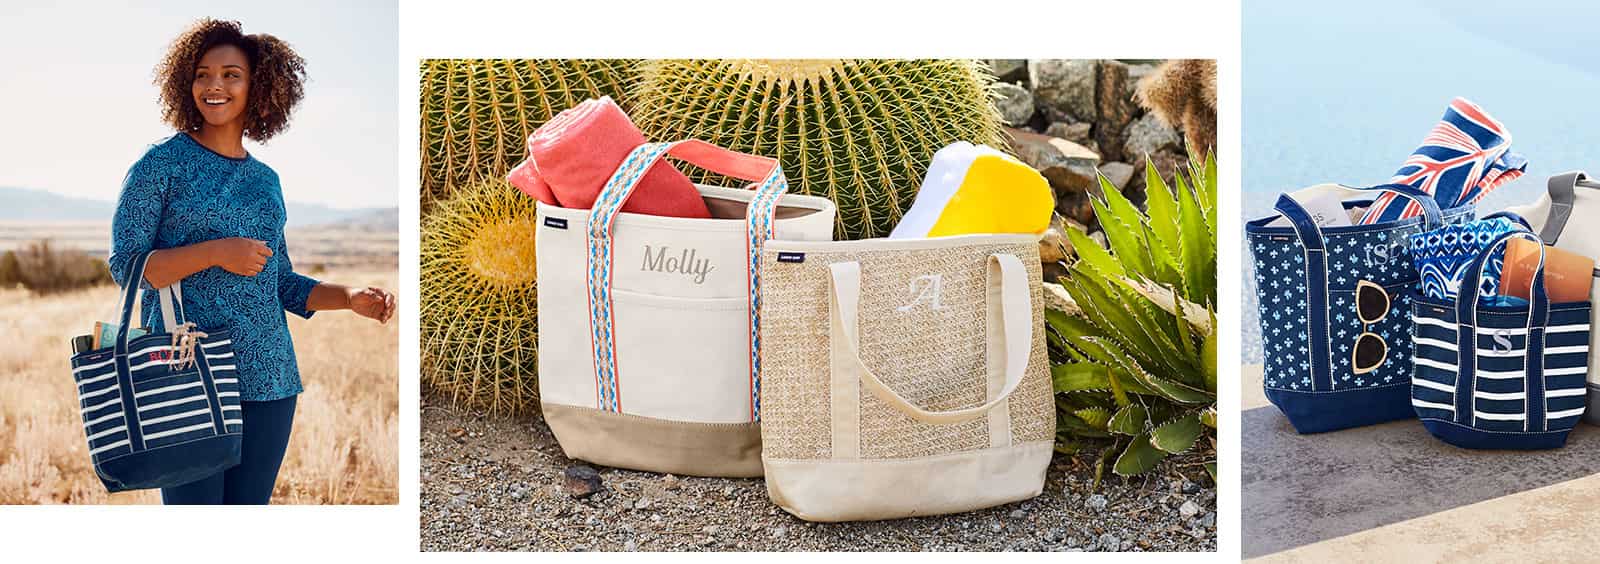 Tips on Finding the Best Beach Bag